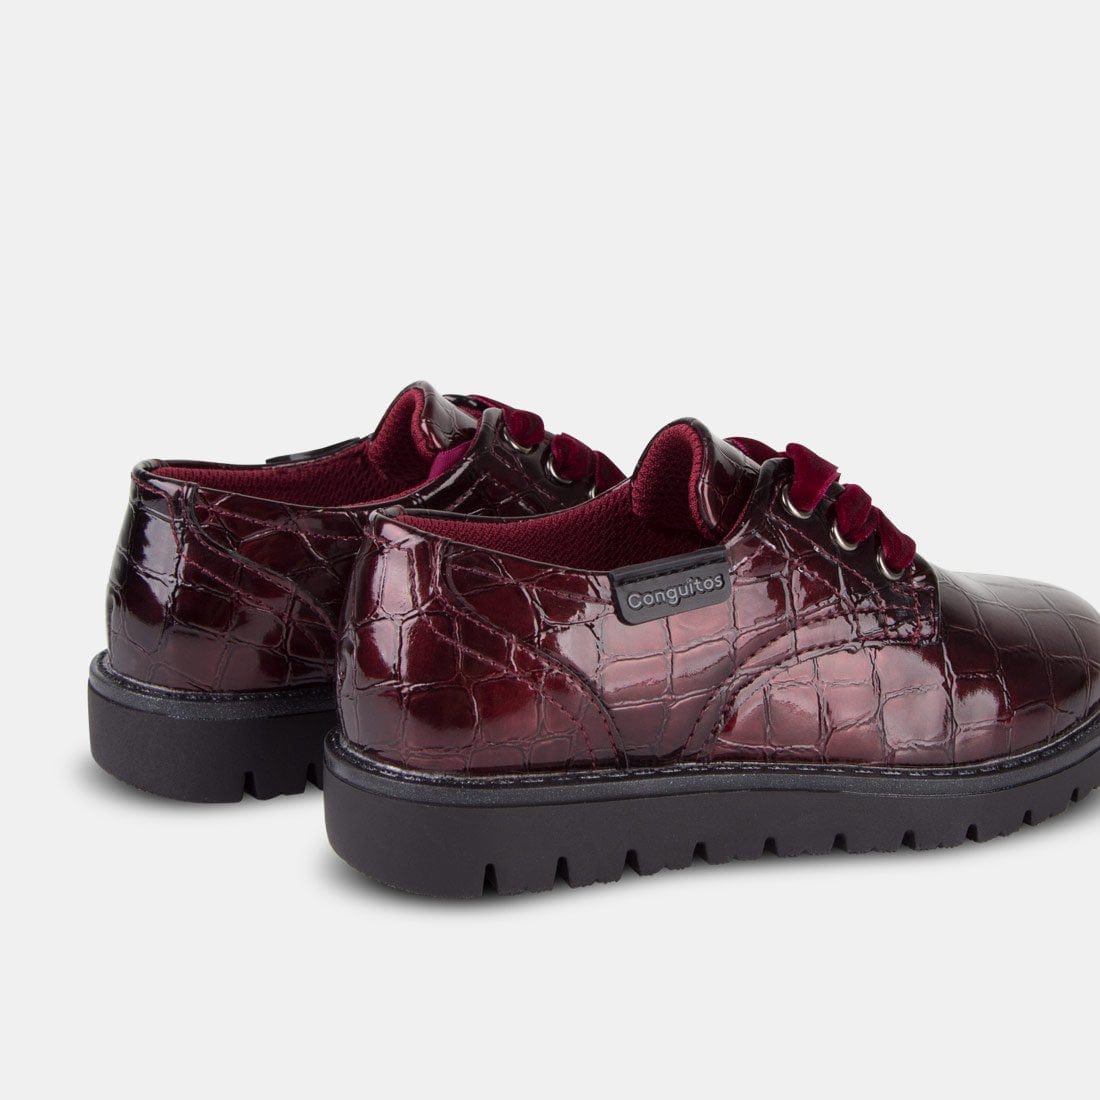 CONGUITOS Shoes Girl's Wine Patent Leather Shoes